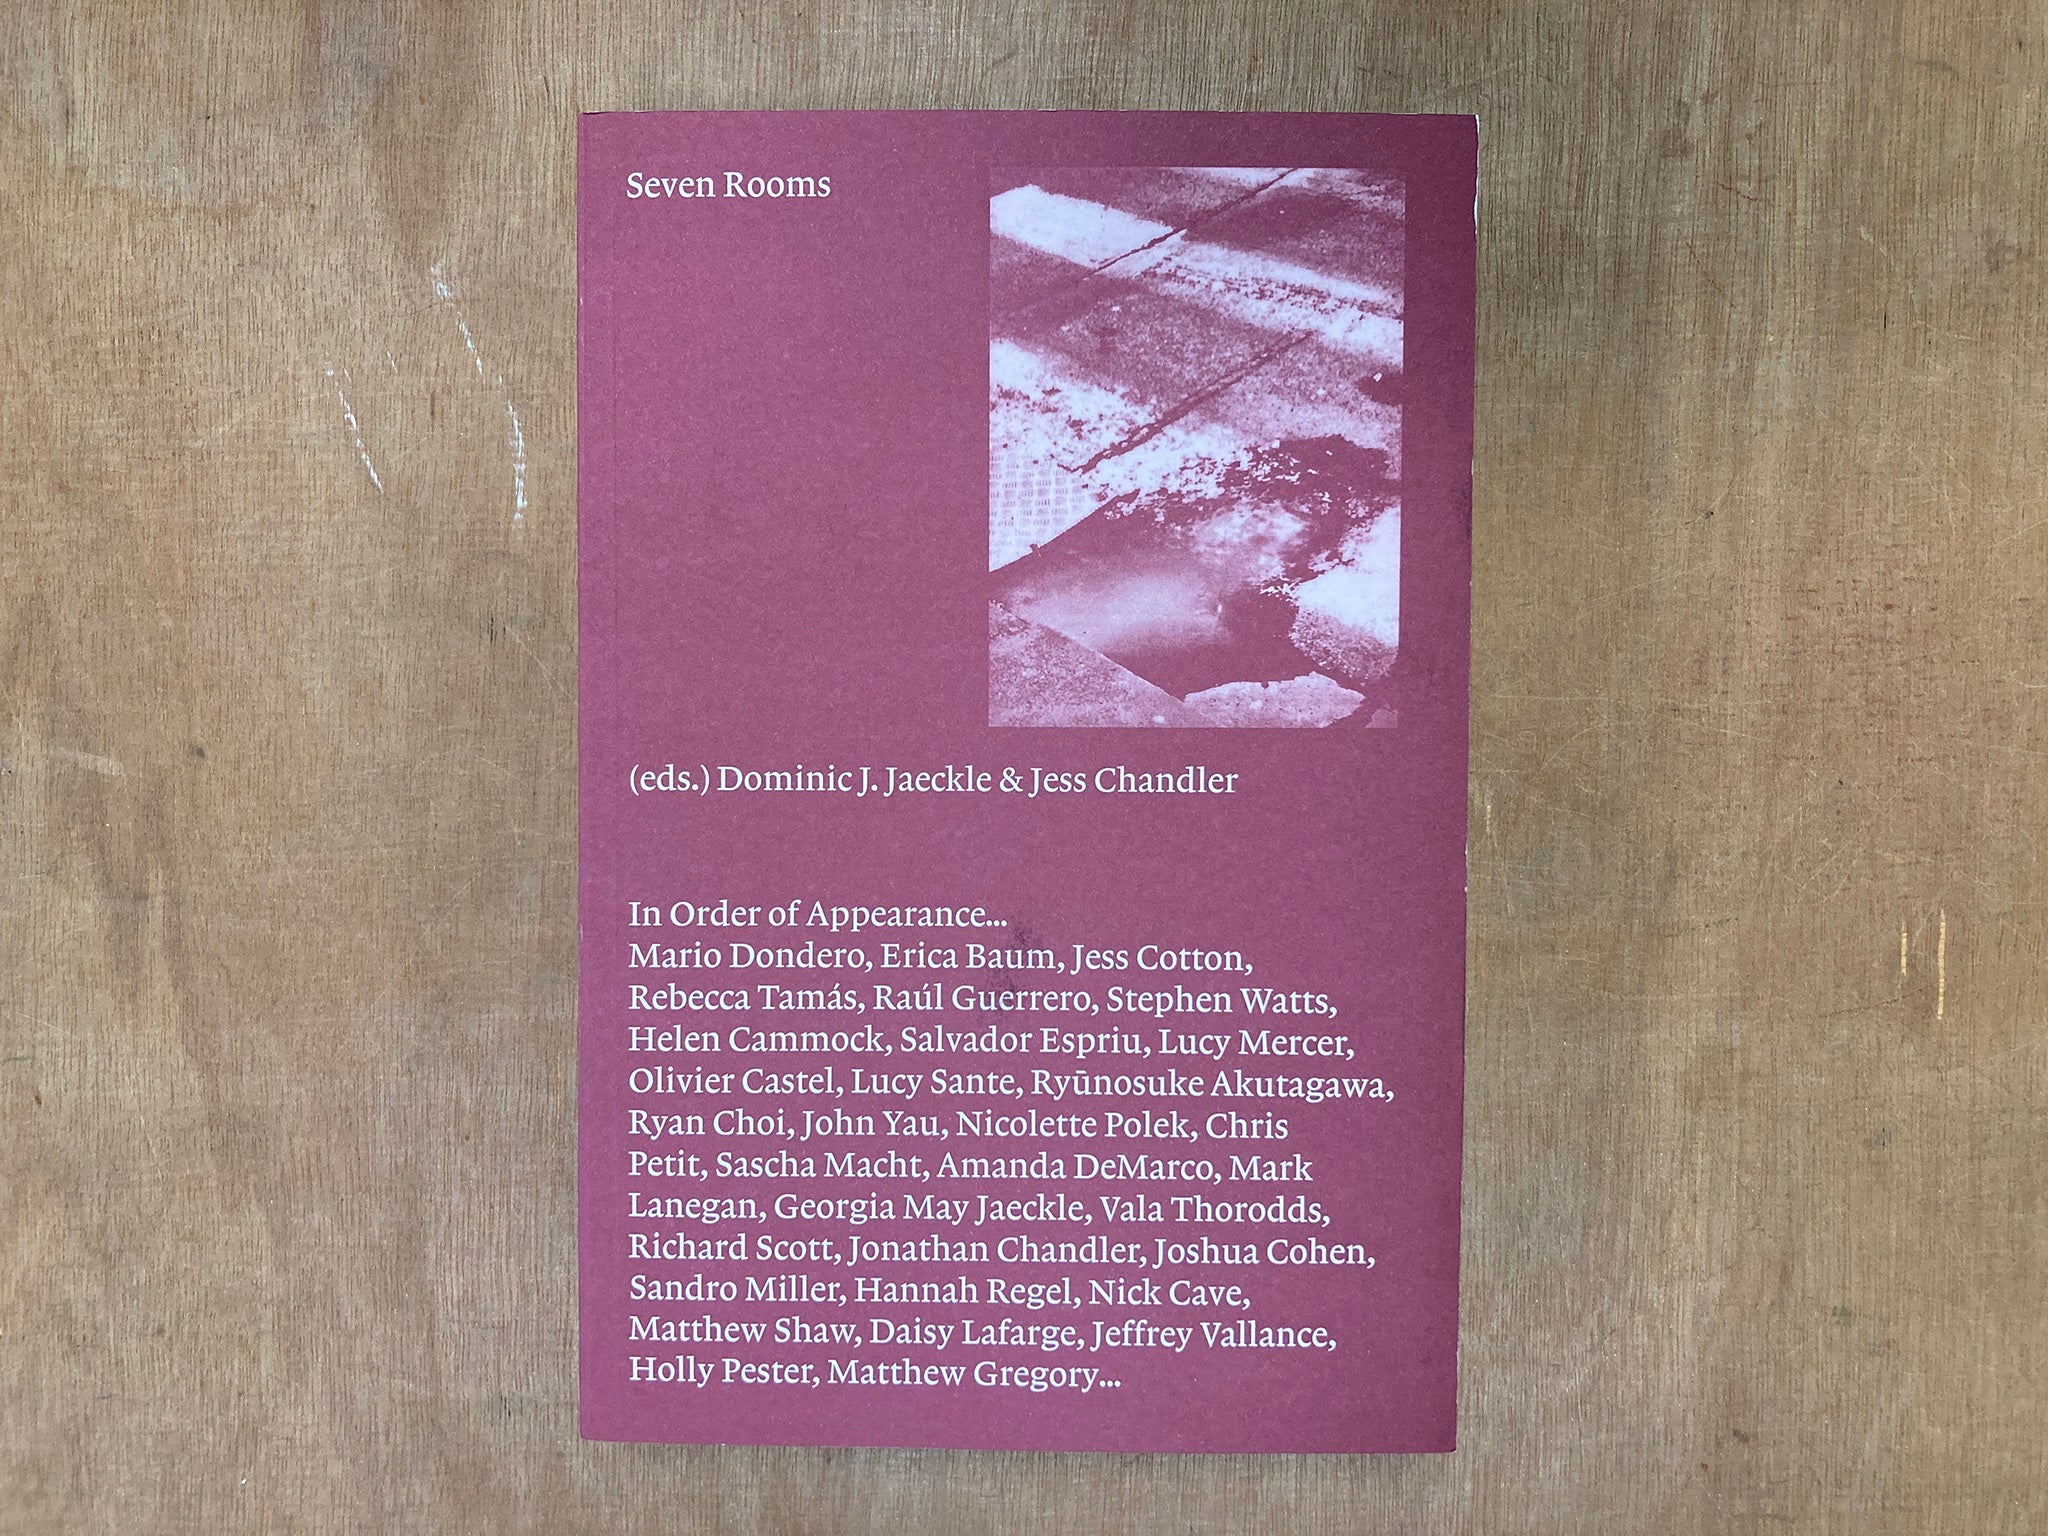 SEVEN ROOMS edited by Dominic J. Jaeckle & Jess Chandler